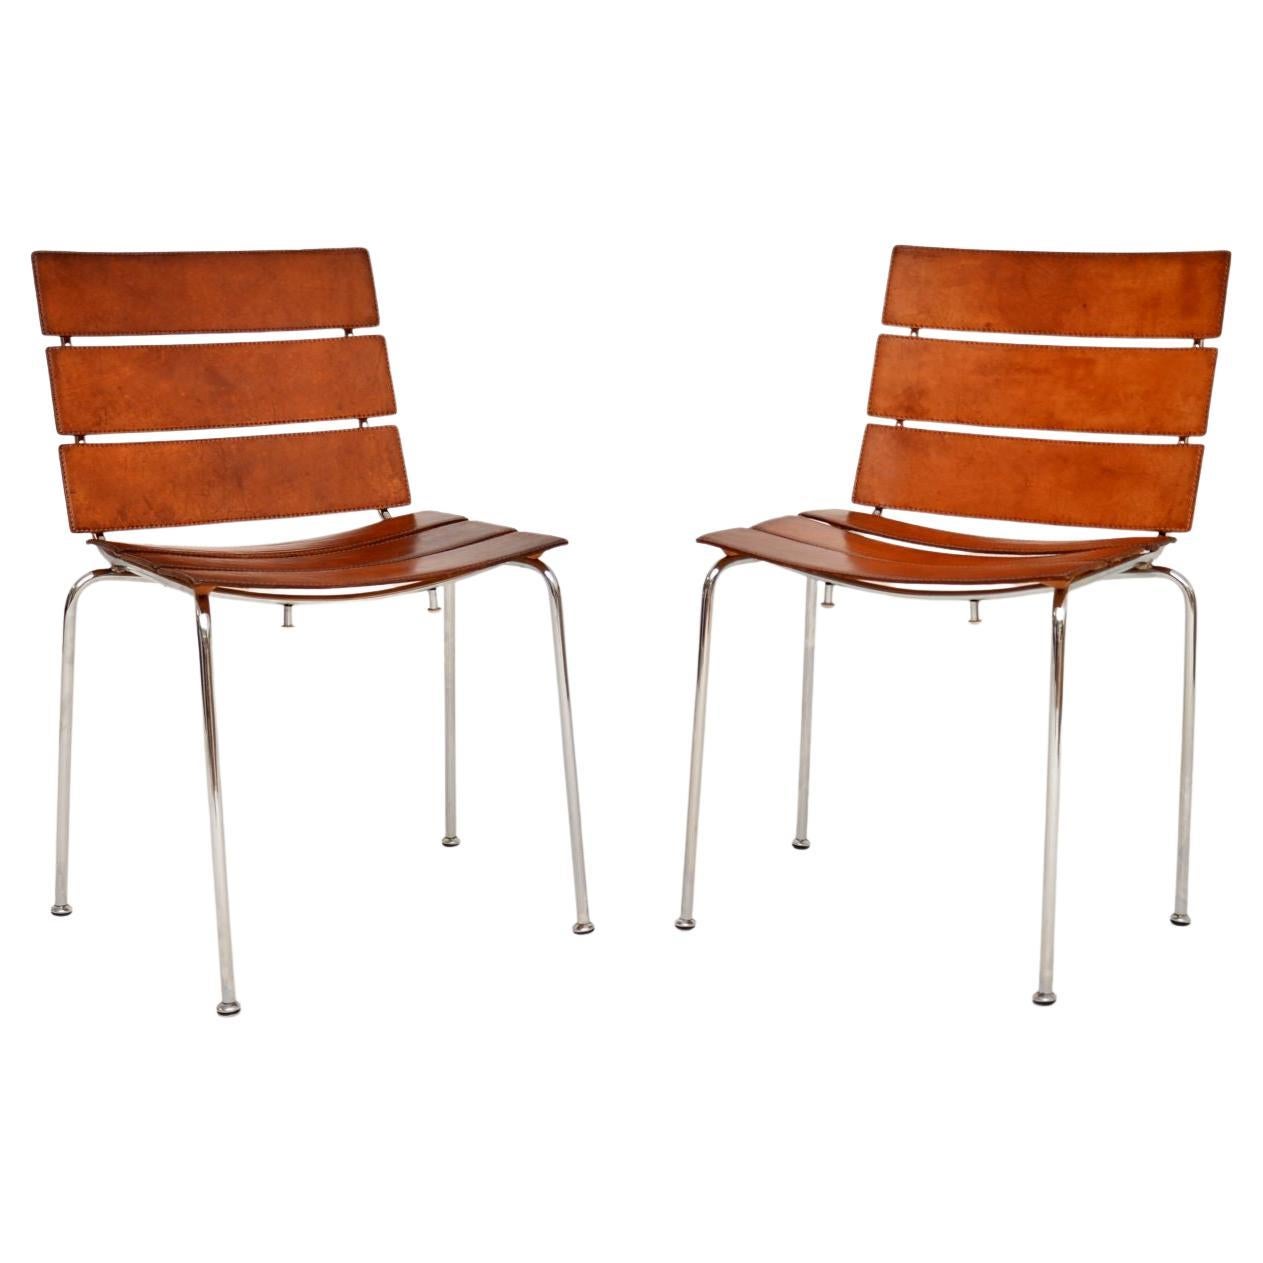 1970’s Pair of Vintage Italian Leather & Chrome ‘Stripe’ Chairs by Giancarlo Veg For Sale